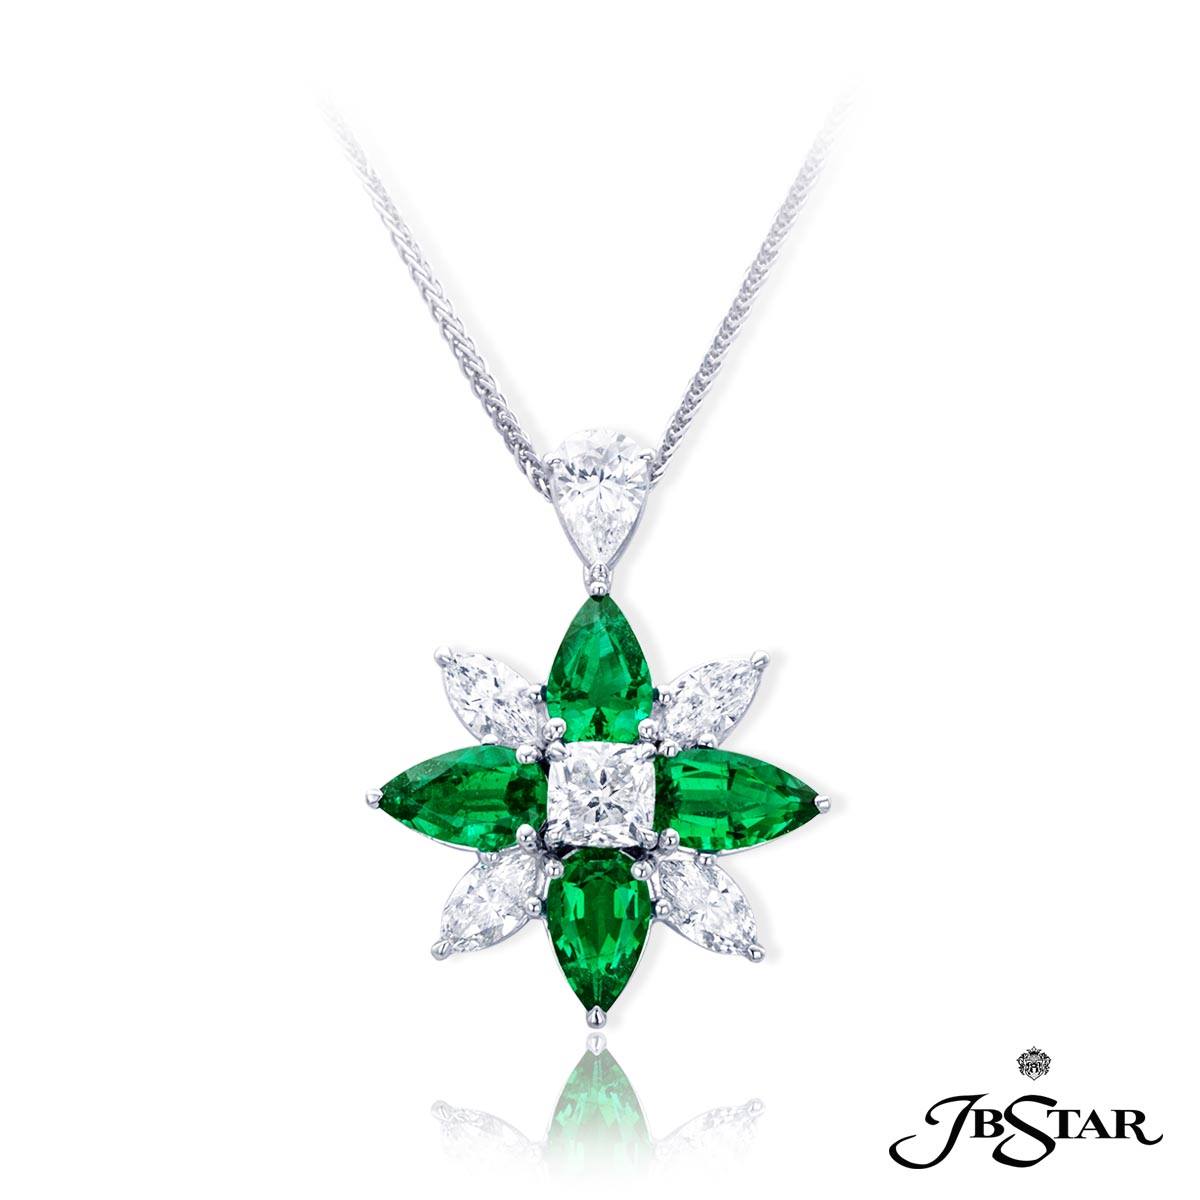 Pear Shaped emeralds and Marquite diamonds